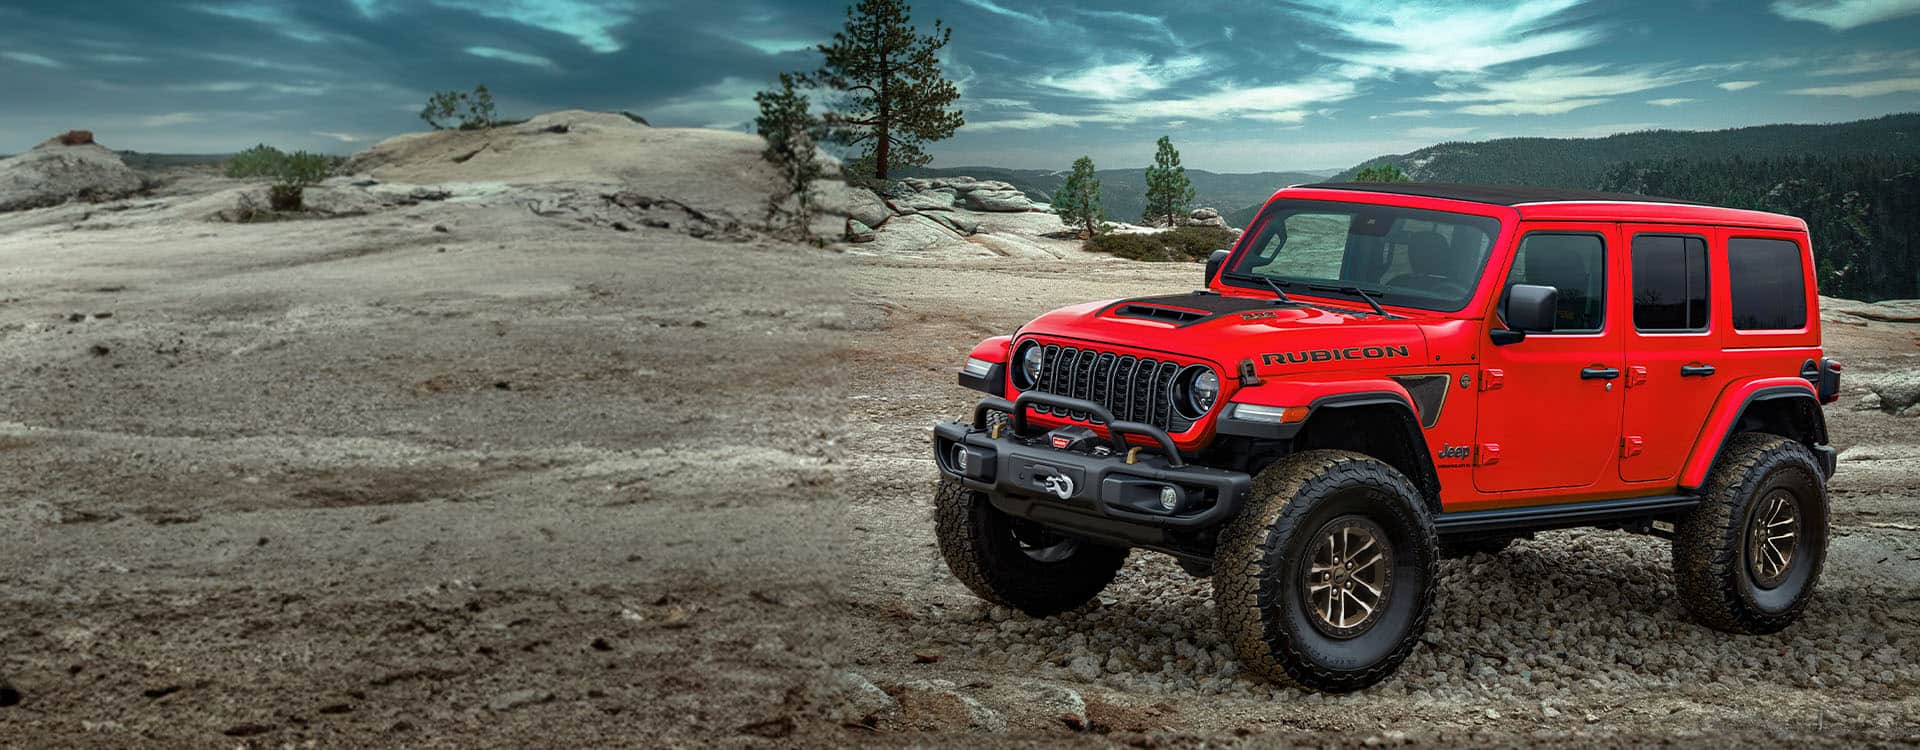 A red 2024 Jeep Wrangler Rubicon 392 Final Edition parked in a rocky clearing off-road, with mountains and a stormy sky in the background.